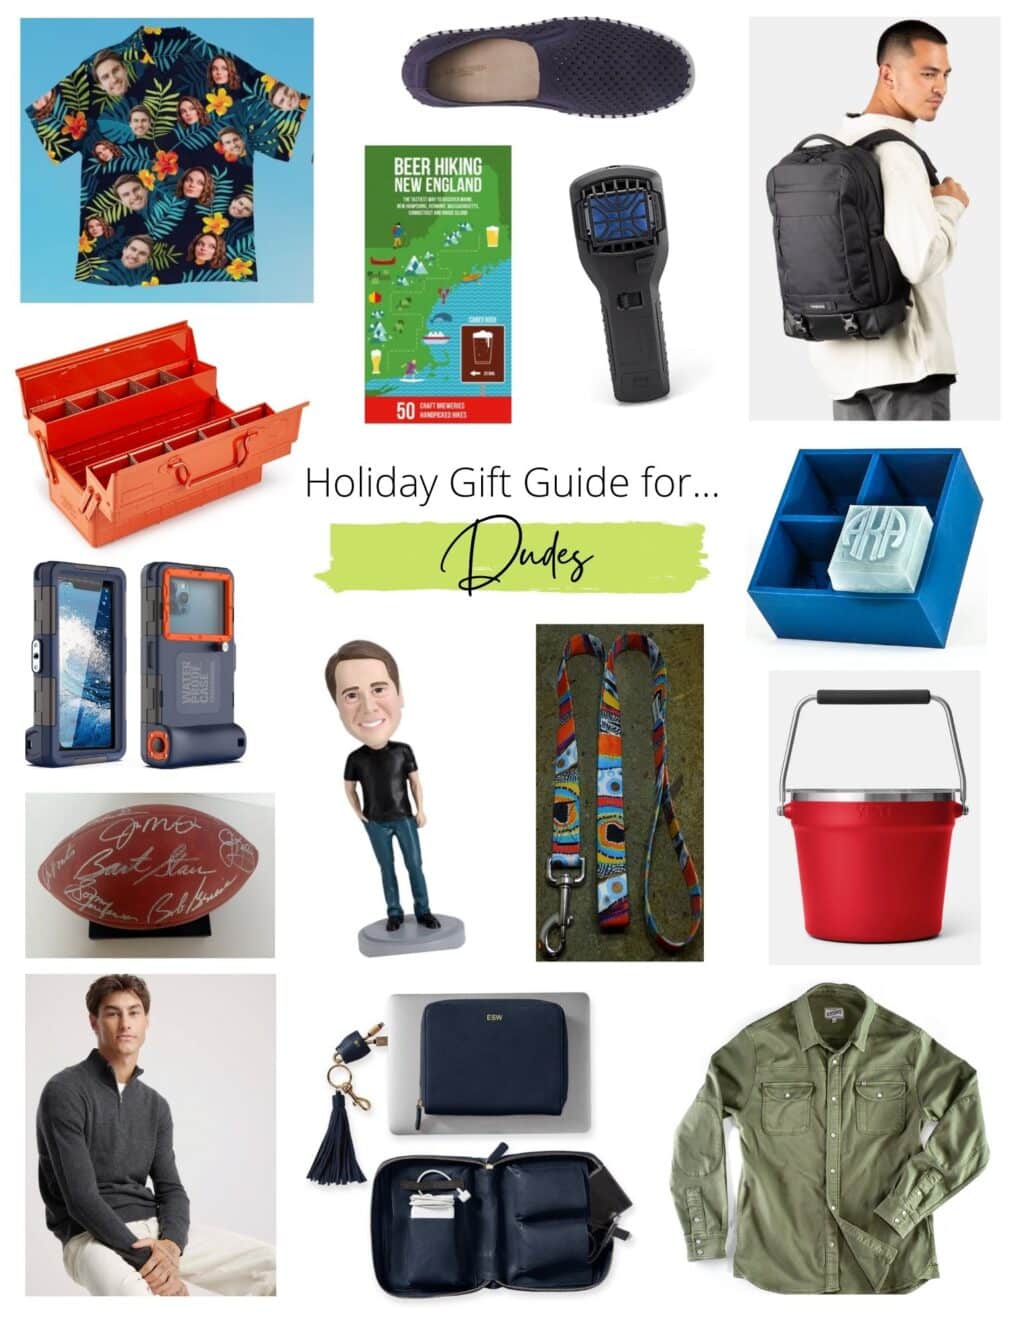 Collaged image of gift ideas for men.